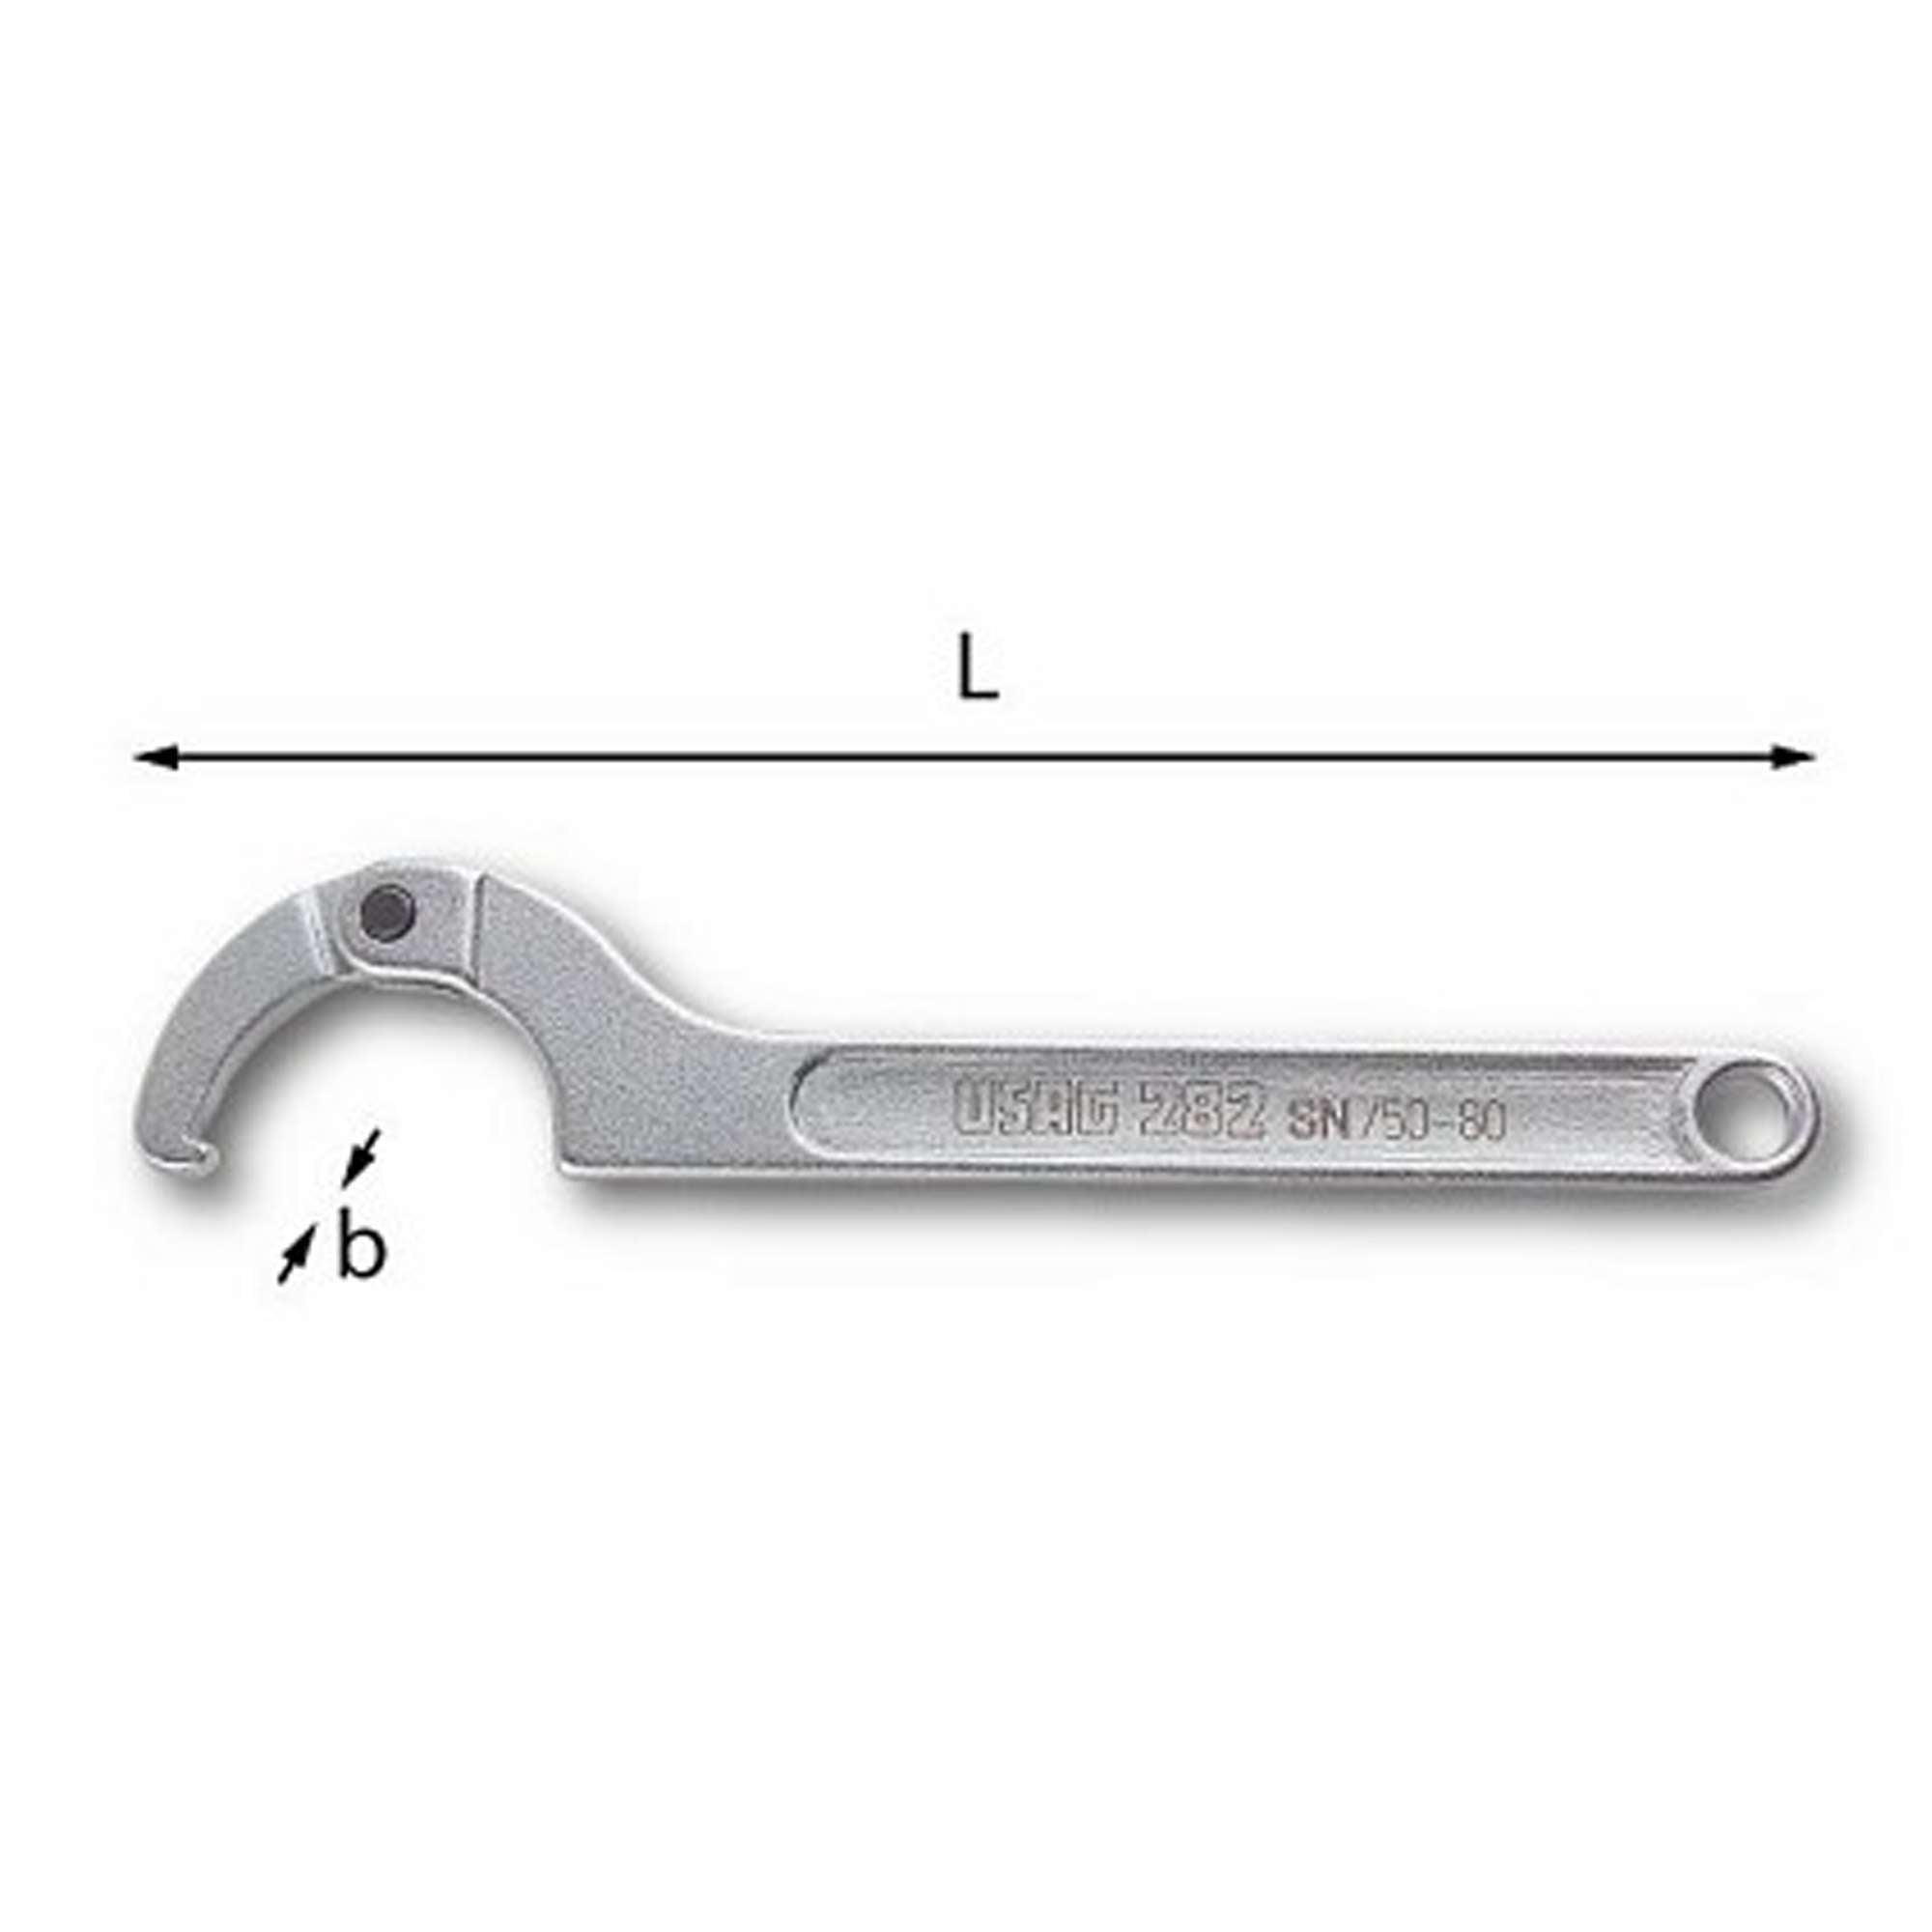 Adjustable hook wrenches with square pin (3,5-4-5-5,5-9,5) - Usag 282 SN